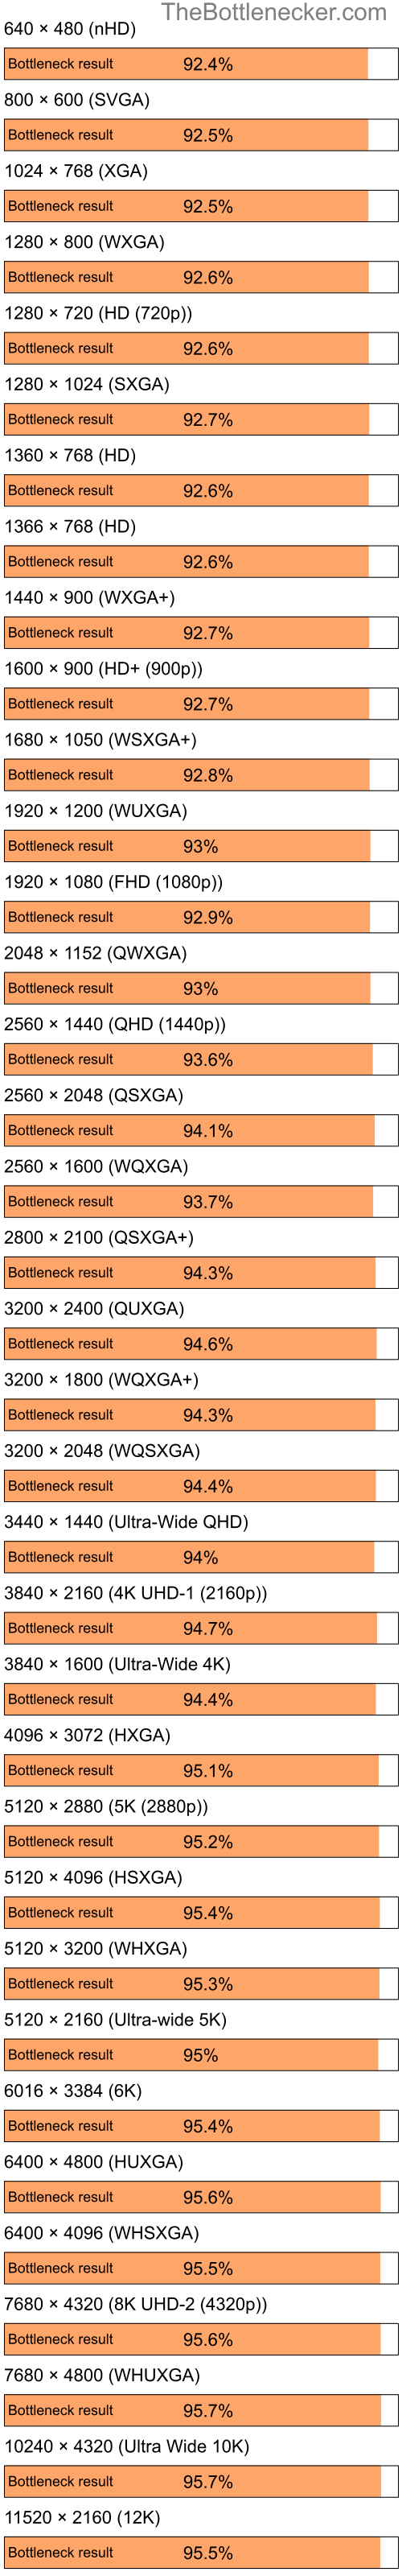 Bottleneck results by resolution for Intel Pentium 4 and NVIDIA GeForce2 Pro in Graphic Card Intense Tasks